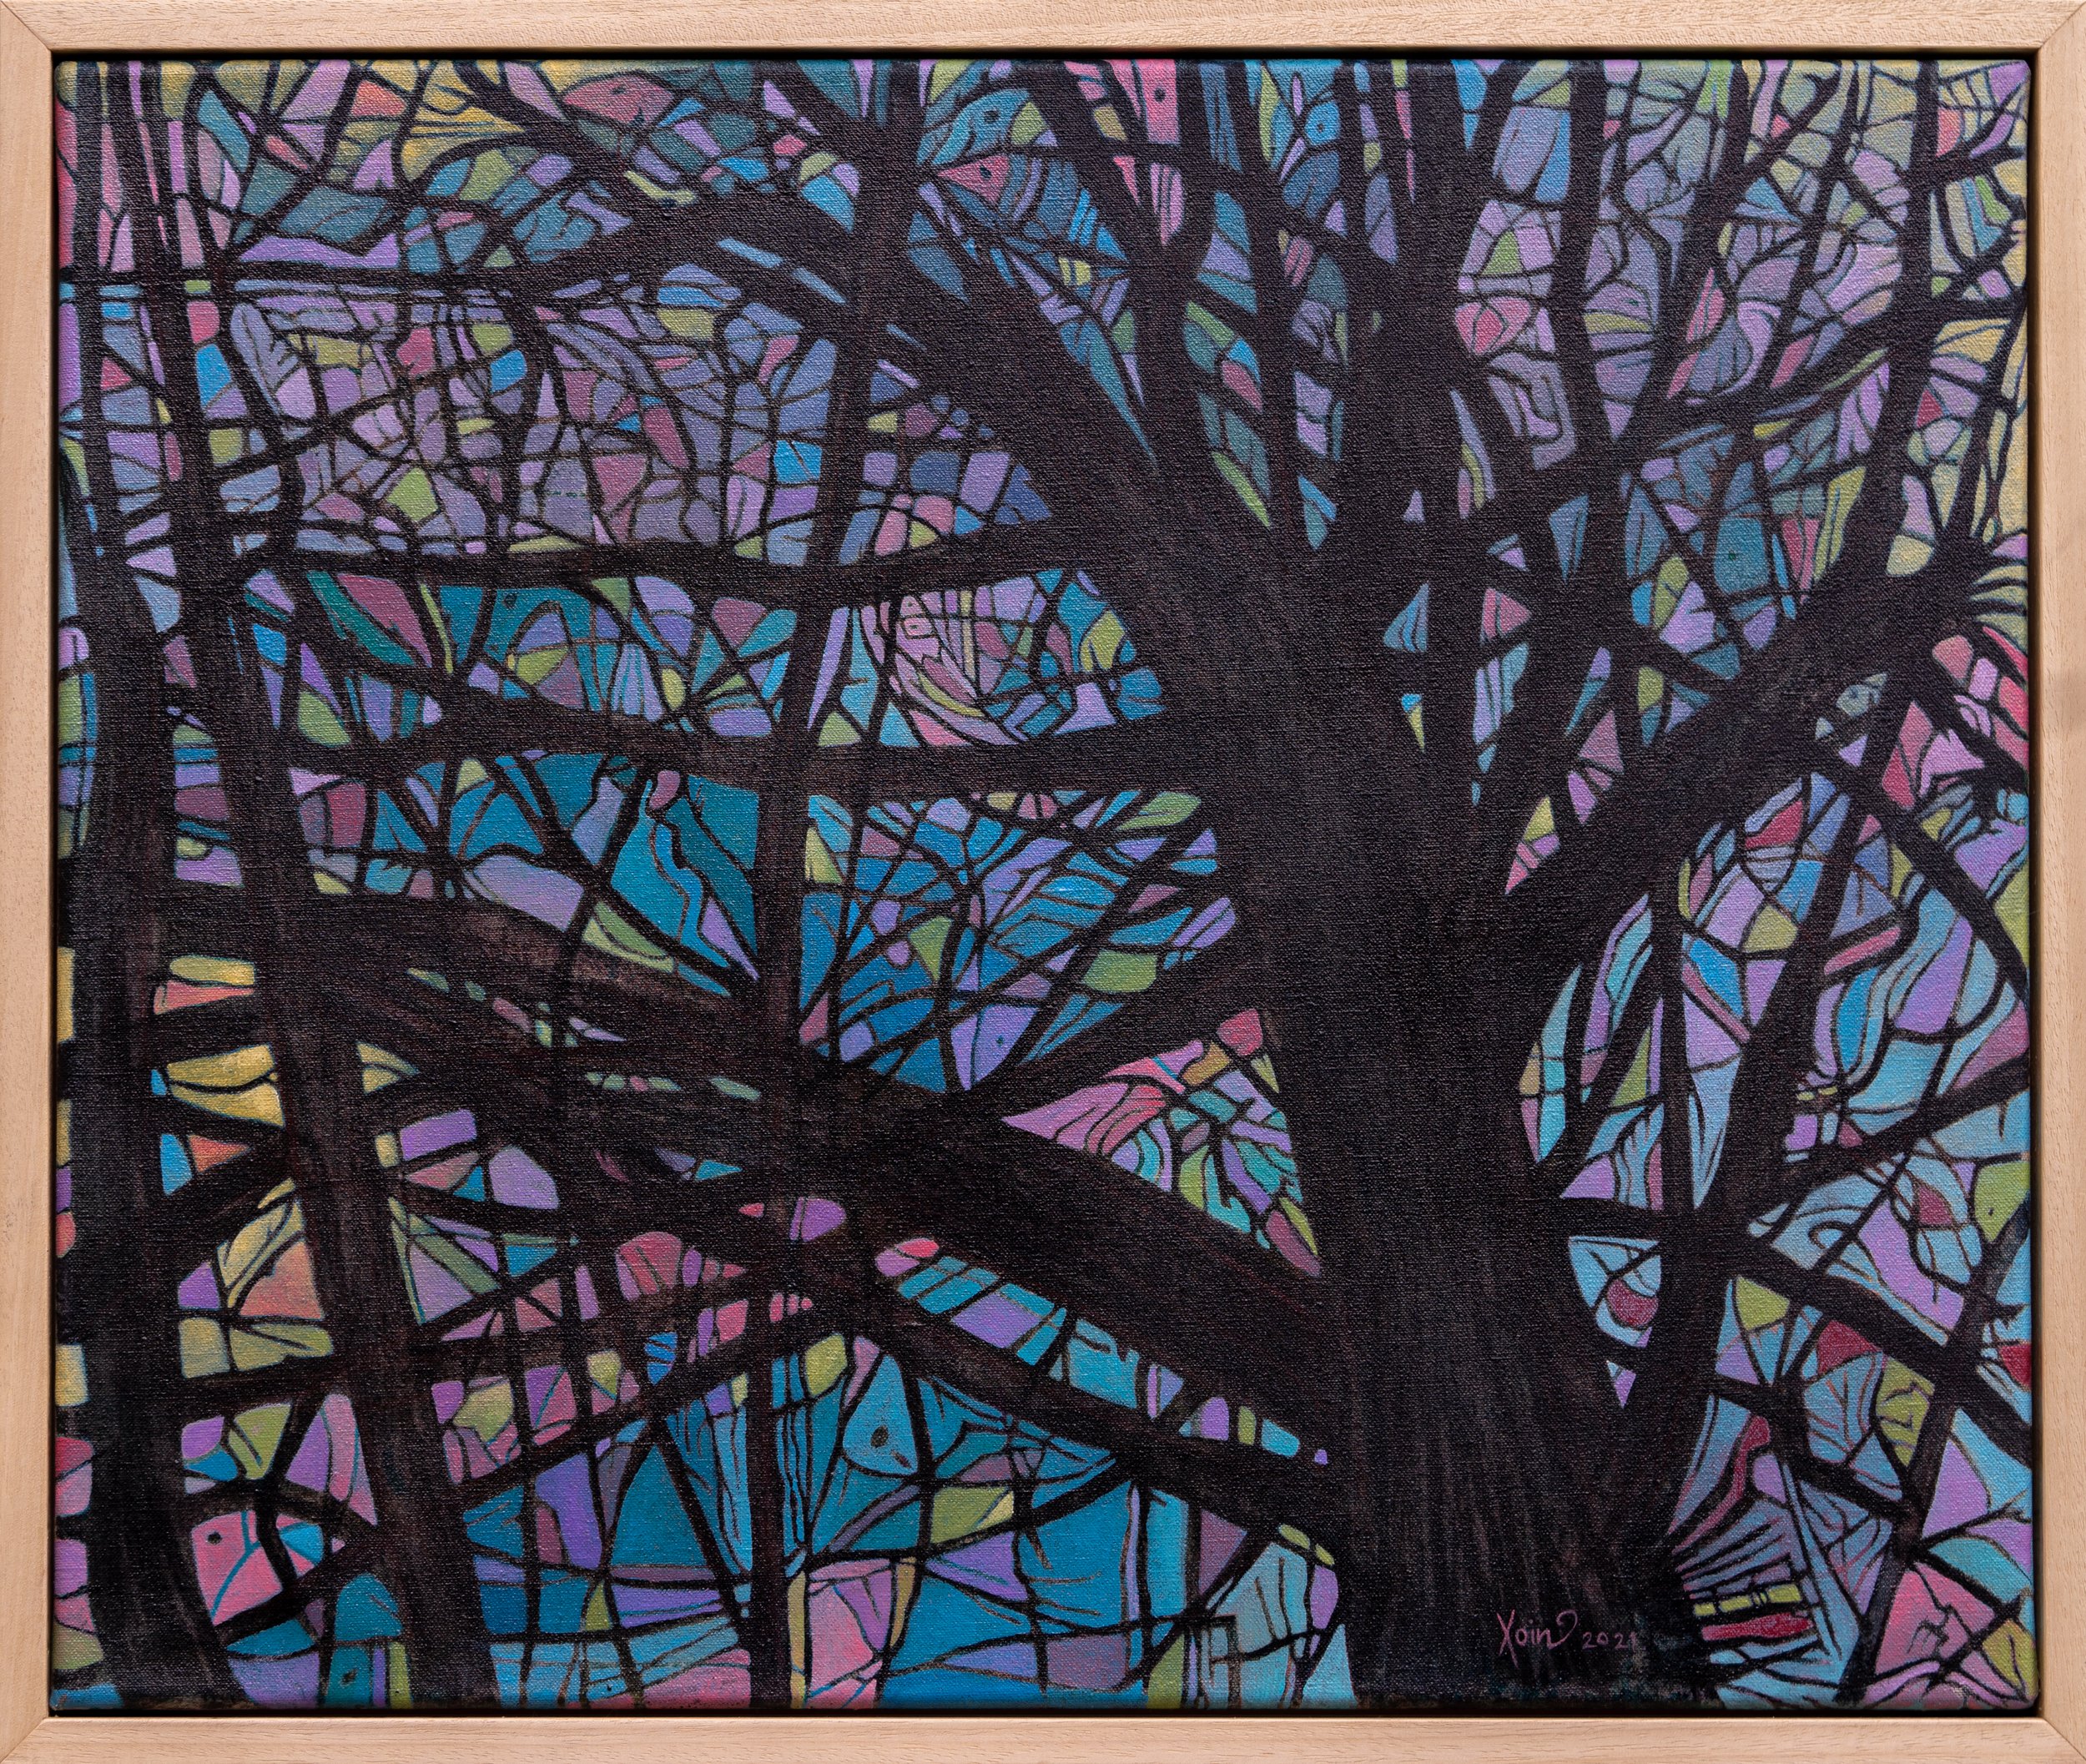 "Looking up through trees 3" 50cm x 60cm, (framed) Charcoal/Acrylic on linen. 2021